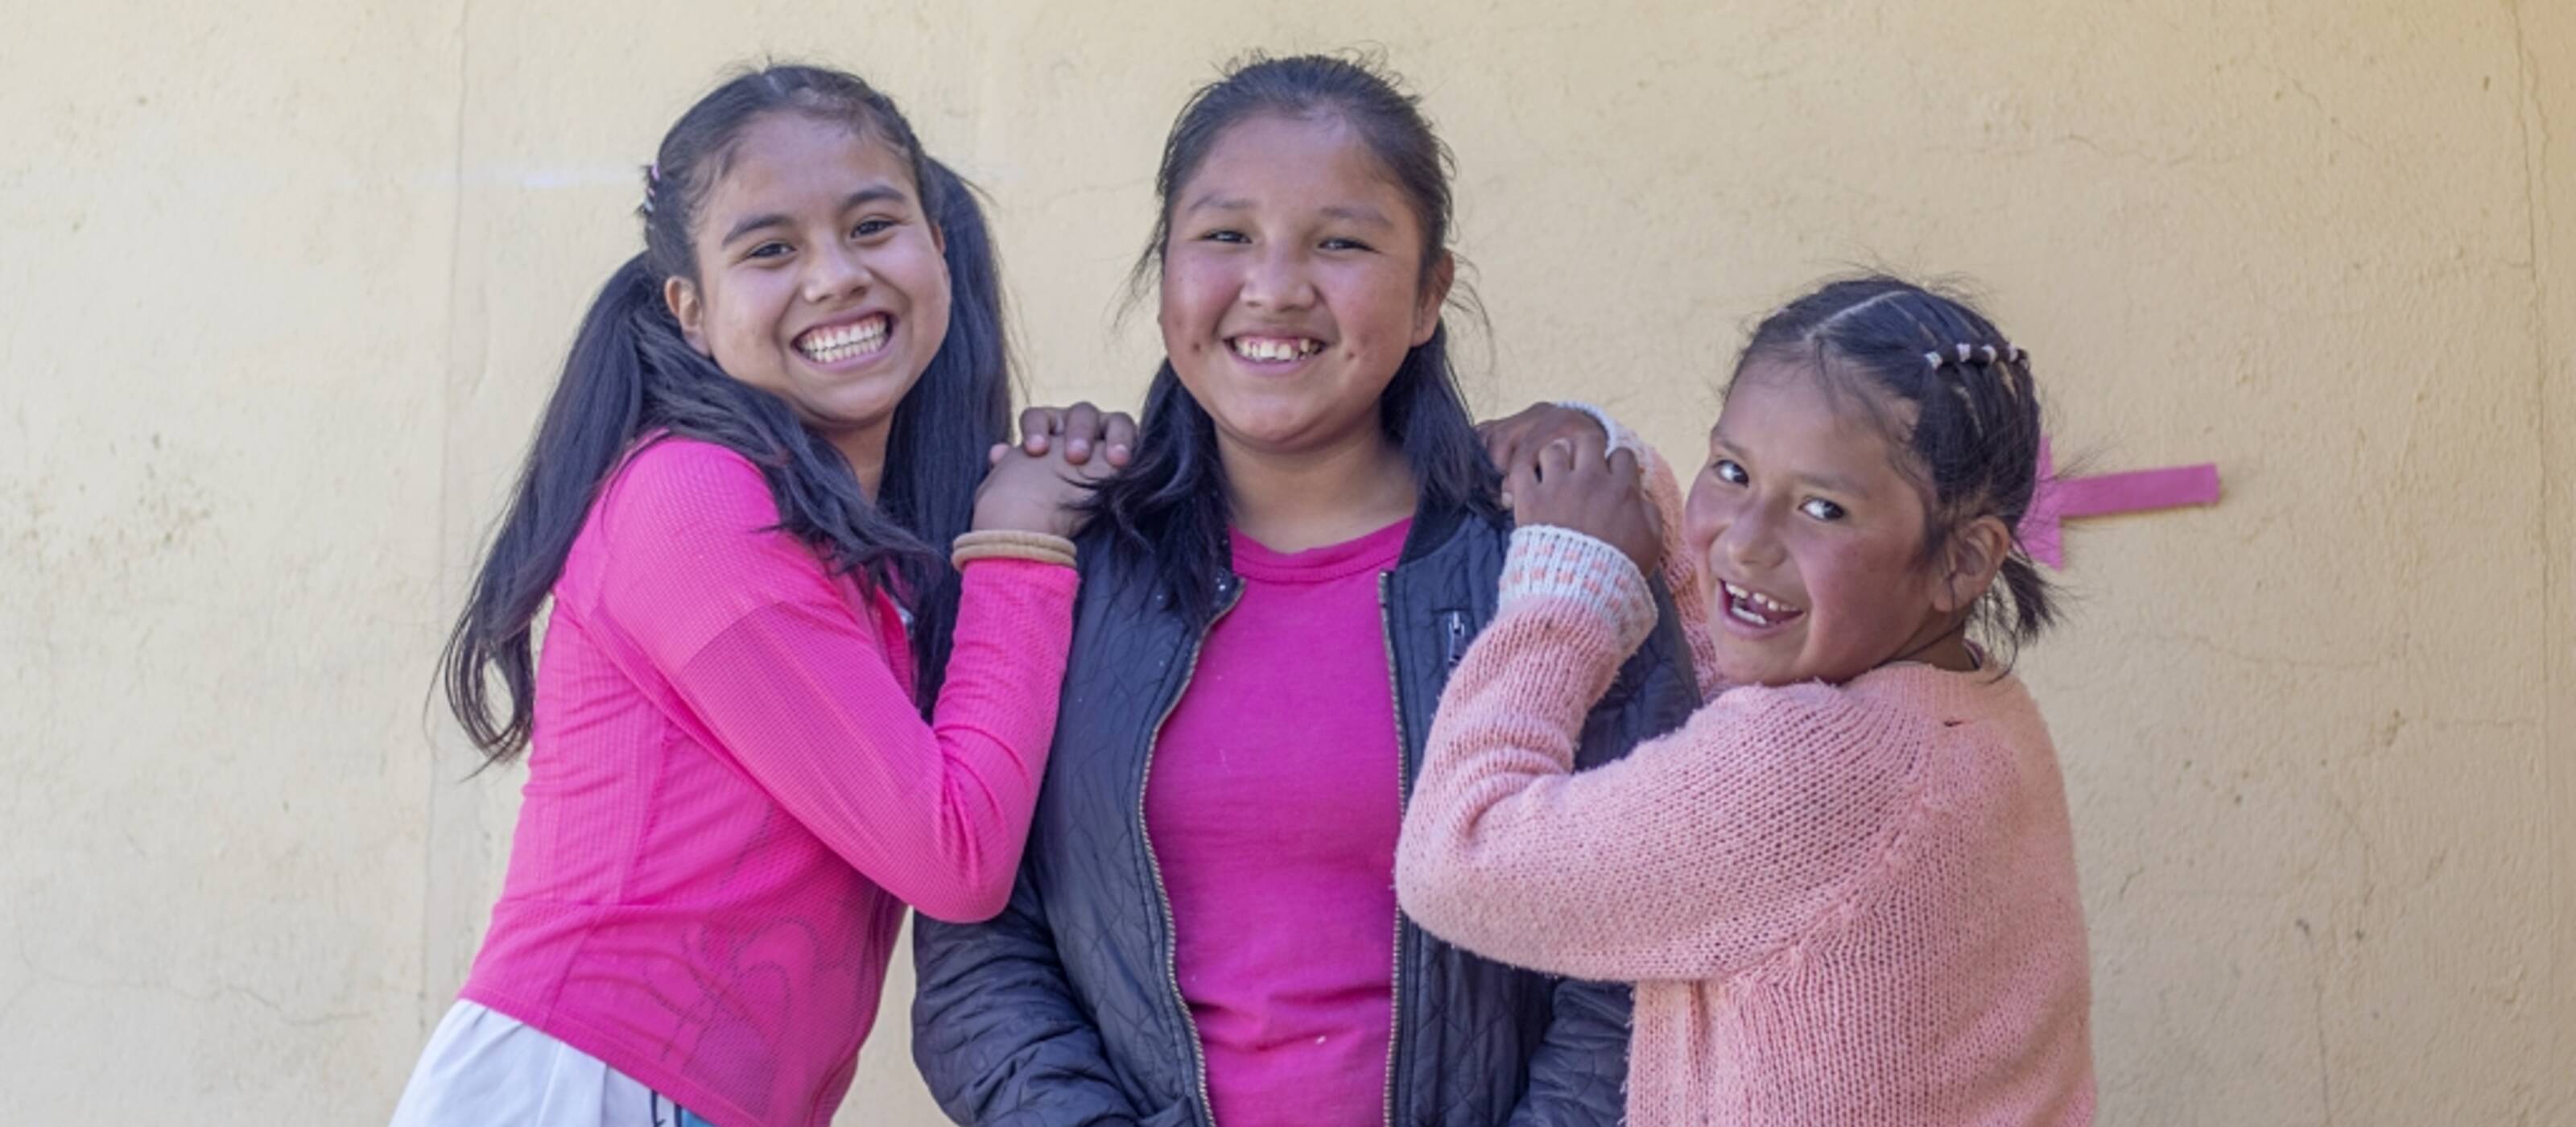 Sexually exploited girls receive protection and refuge at Minka House, Bolivia